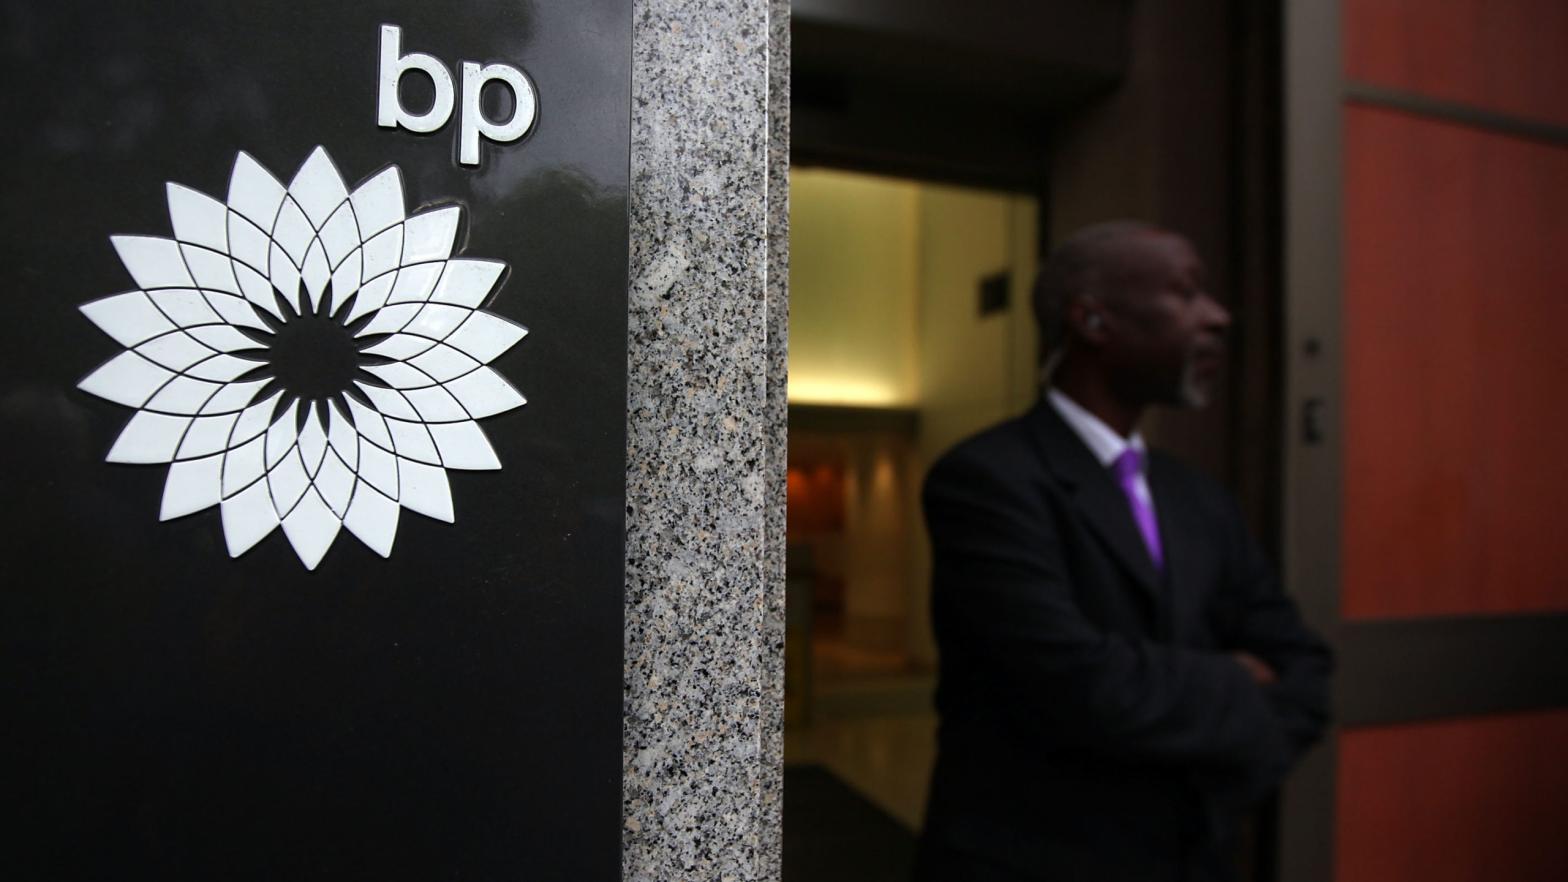 A security guard at the entrance to BP's London headquarters (Photo: Christopher Furlong, Getty Images)